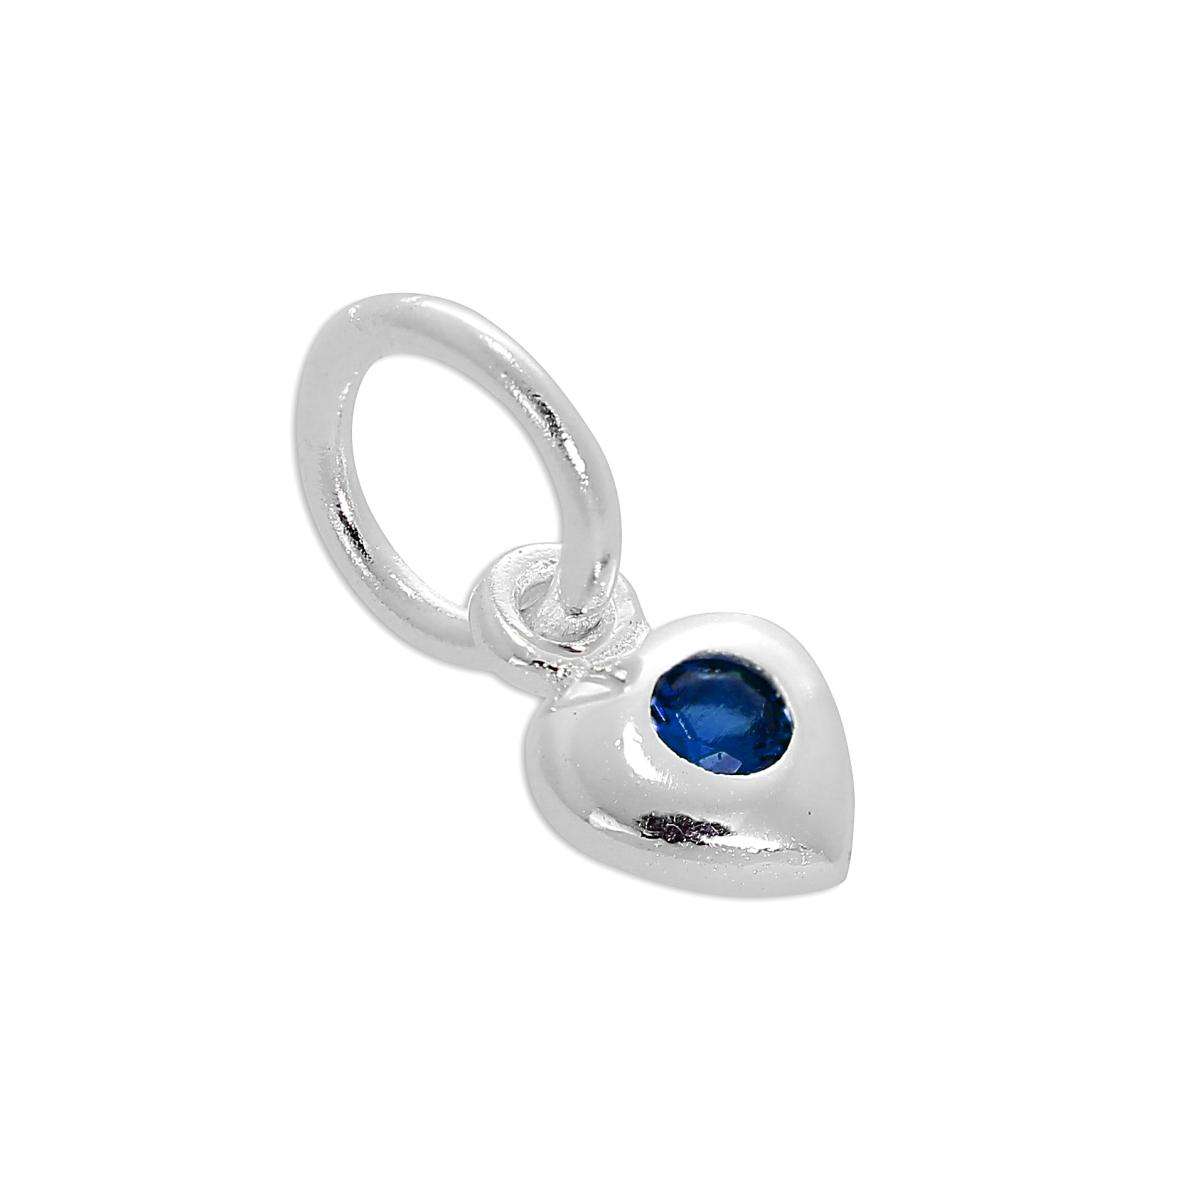 Best Selection Dyed Sapphire Birthstone Charm | Shops Of September Birthstone |